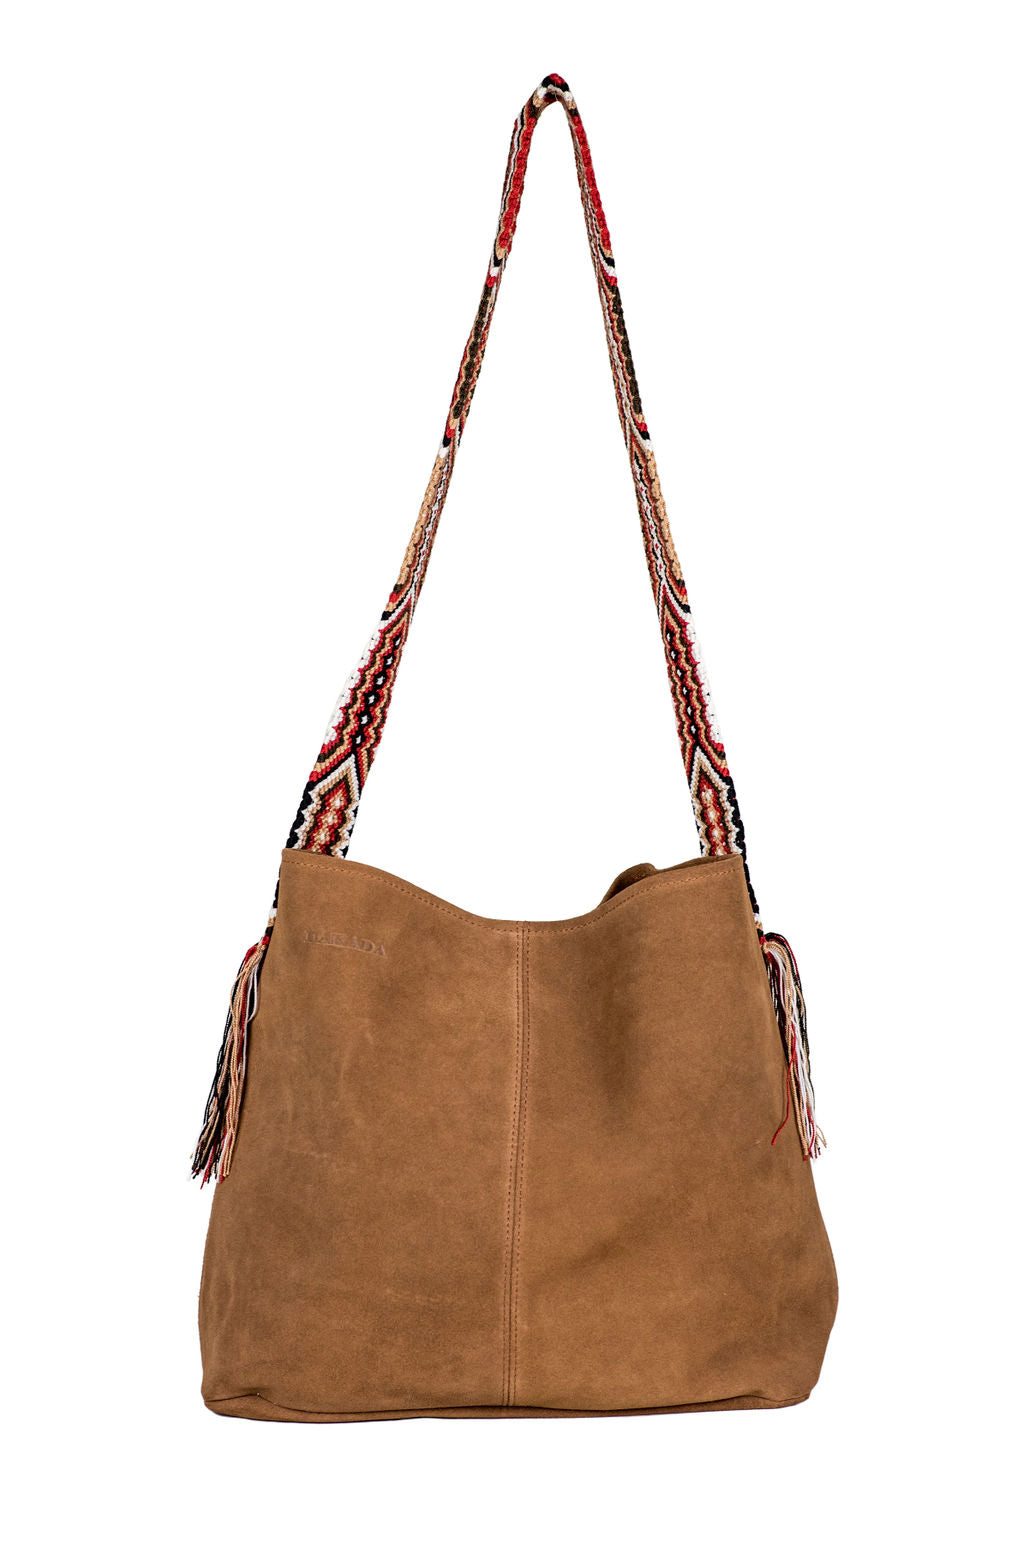 Sydney- Brown Suede Bag with Red Strap